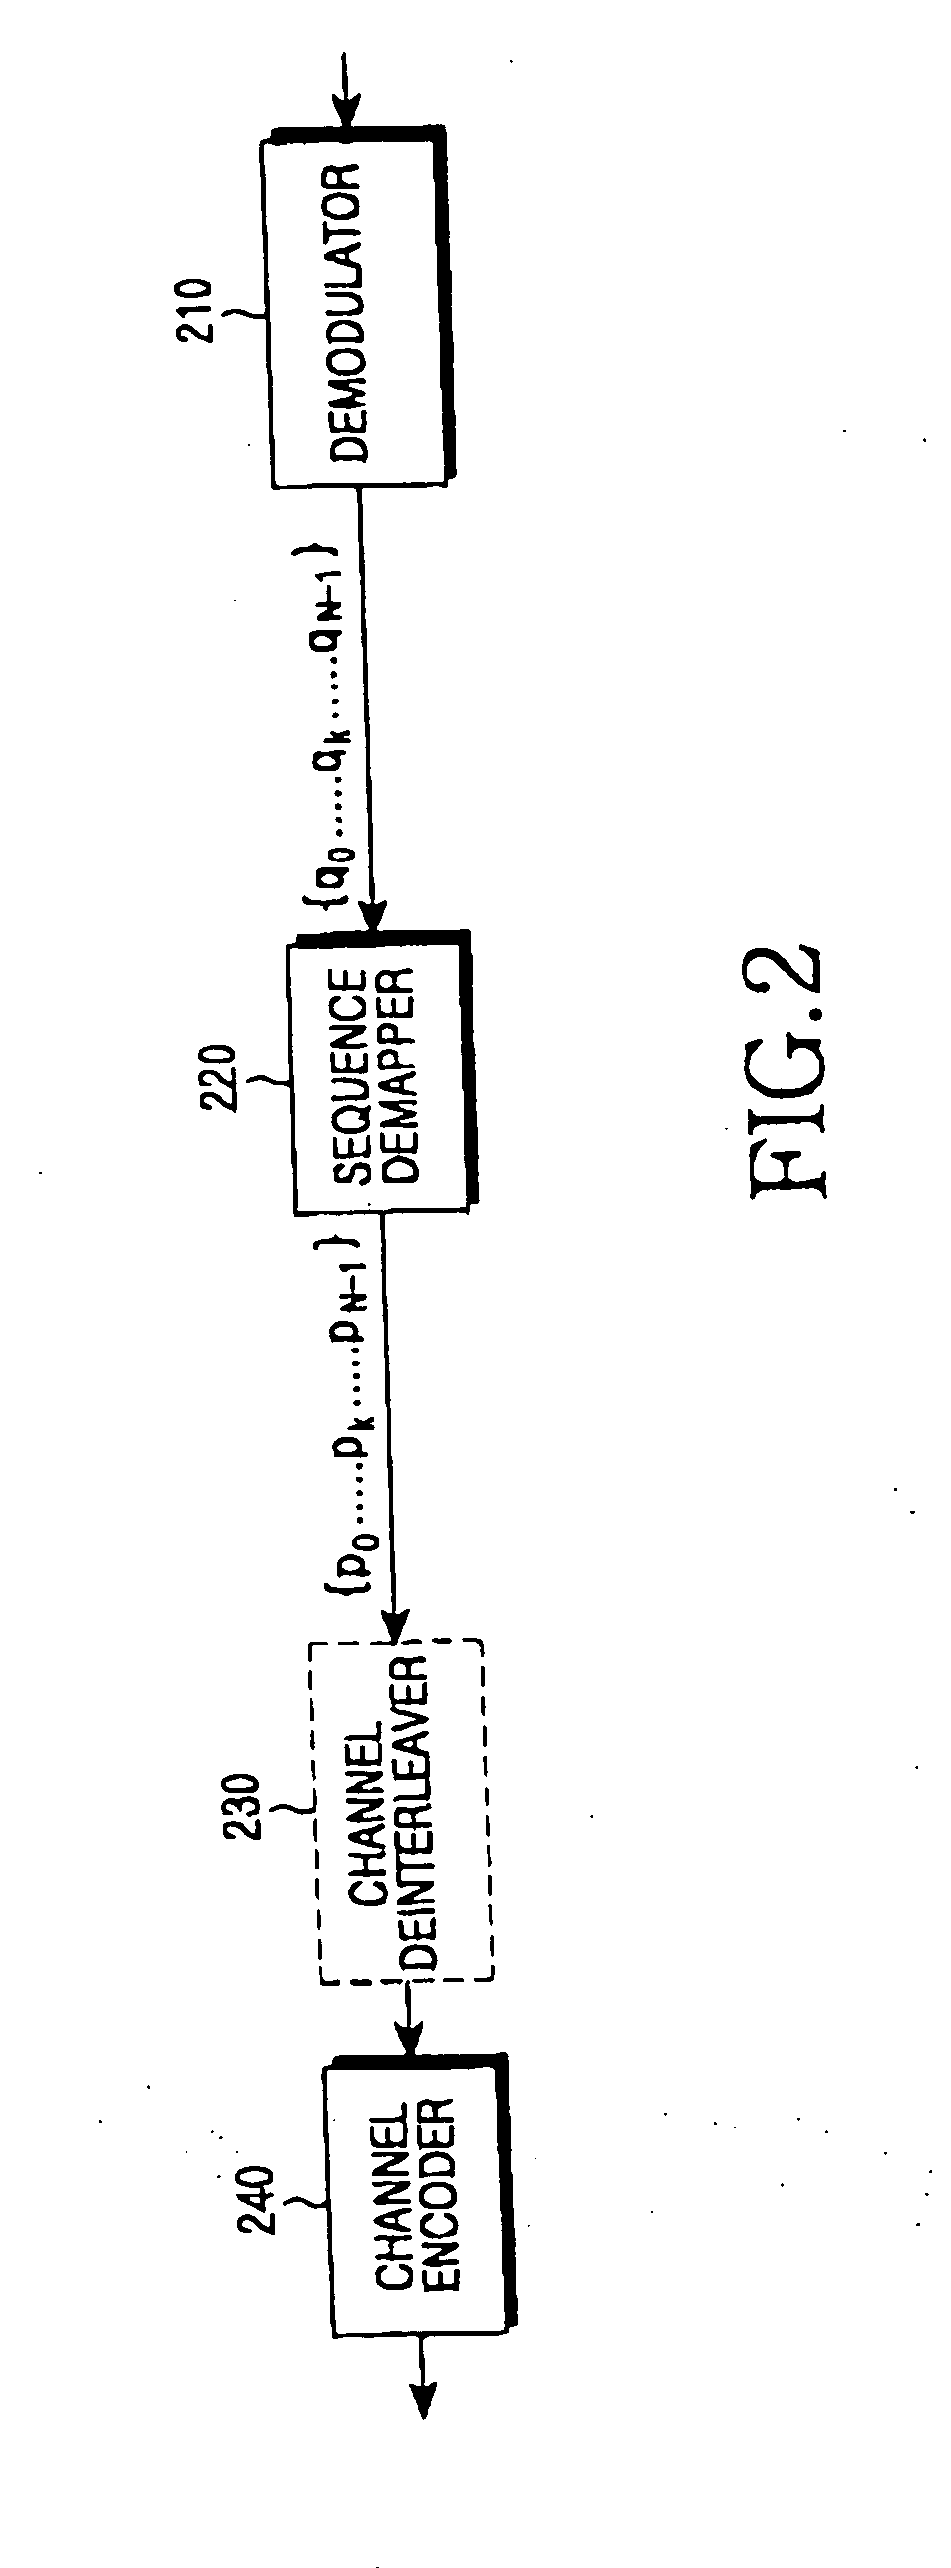 Method and apparatus for rearranging codeword sequence in a communication system